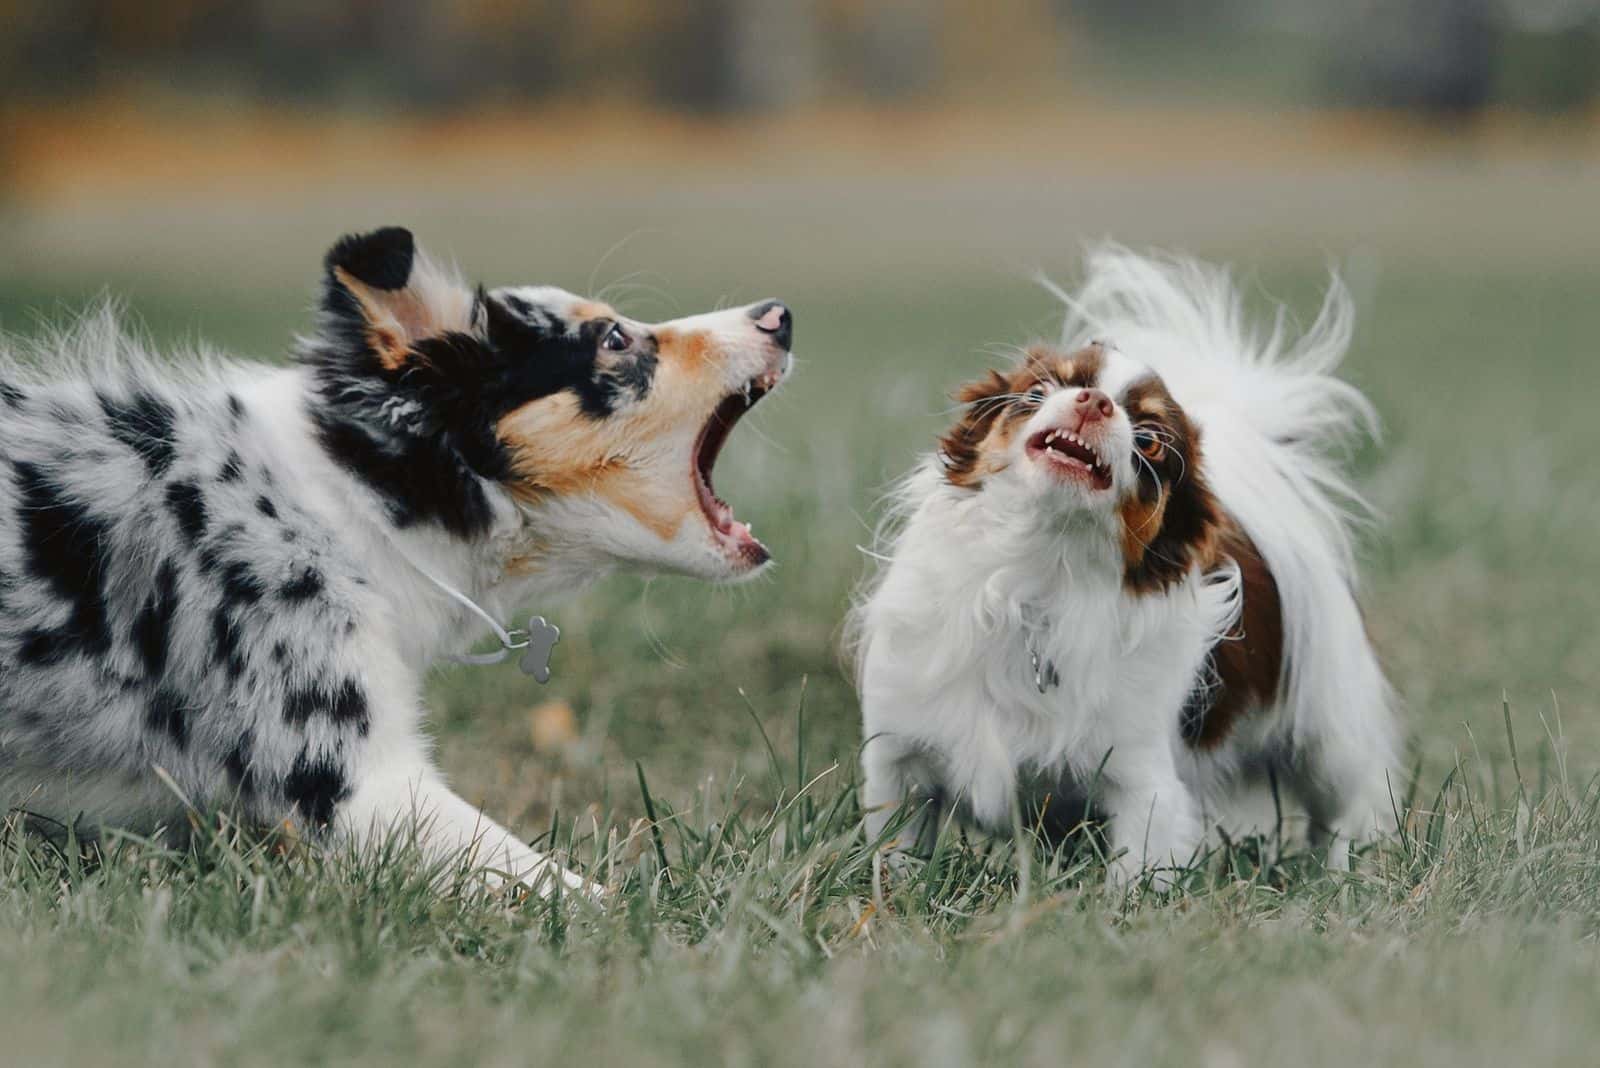 border collie puppy barking at a chihuahuadog outdoors